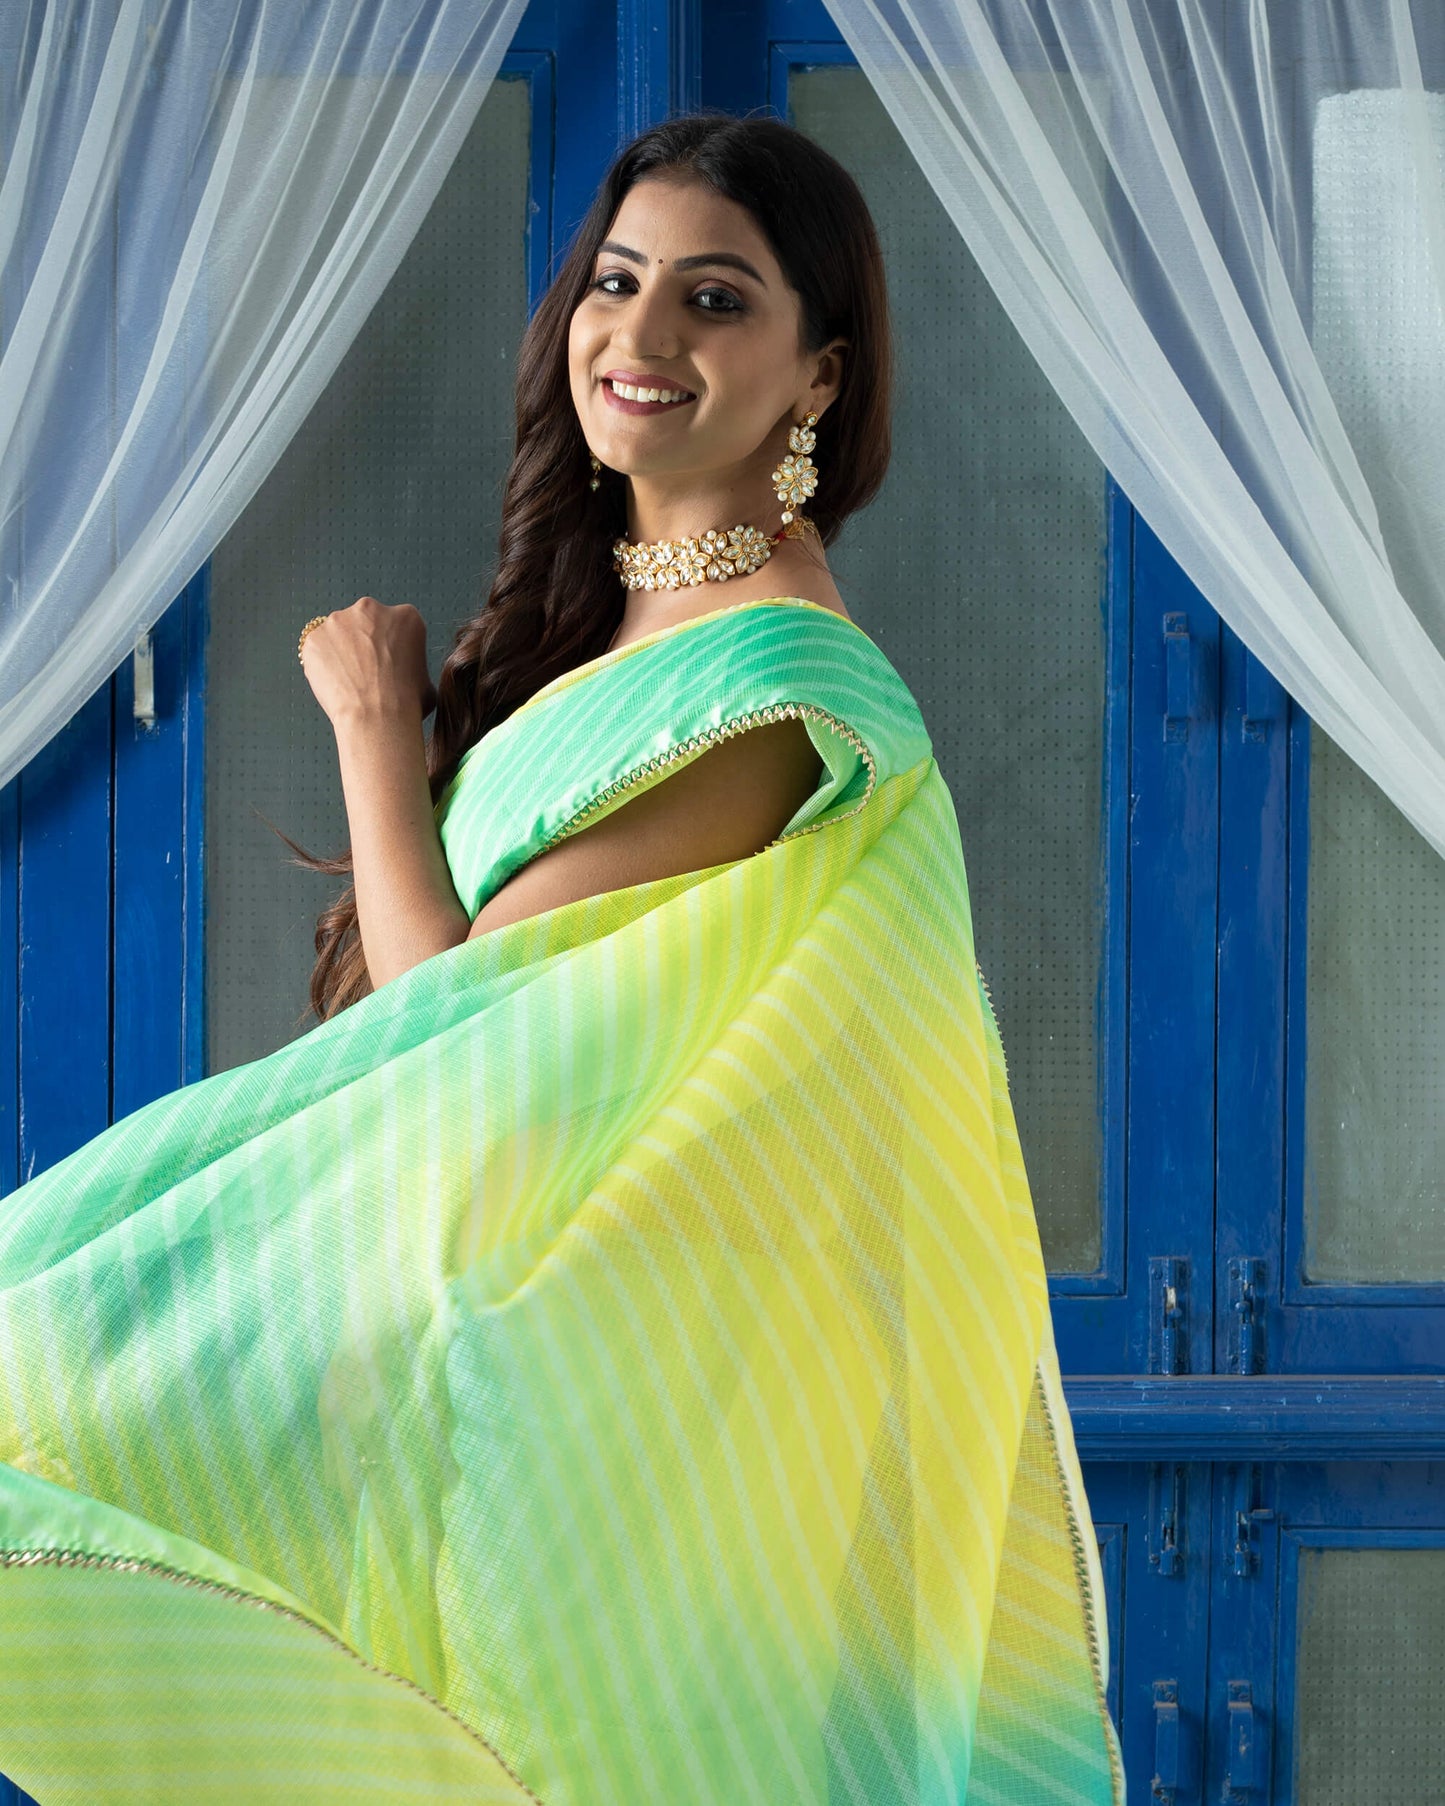 Lemon Yellow And Forest Green Ombre Pattern Digital Print Kota Doria Saree With Sequins Lace Border